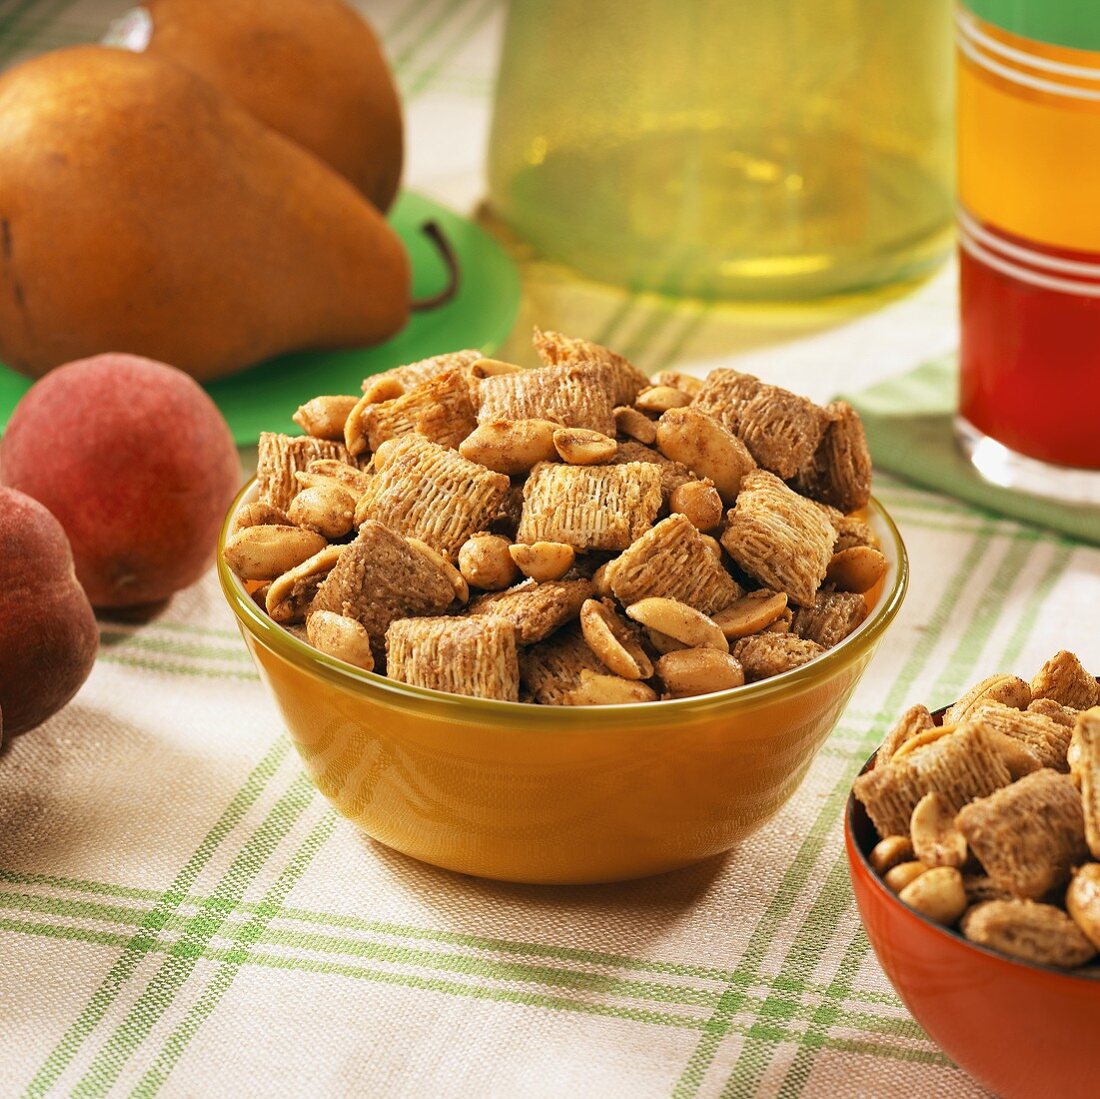 Peanut and Cereal Snack Mix